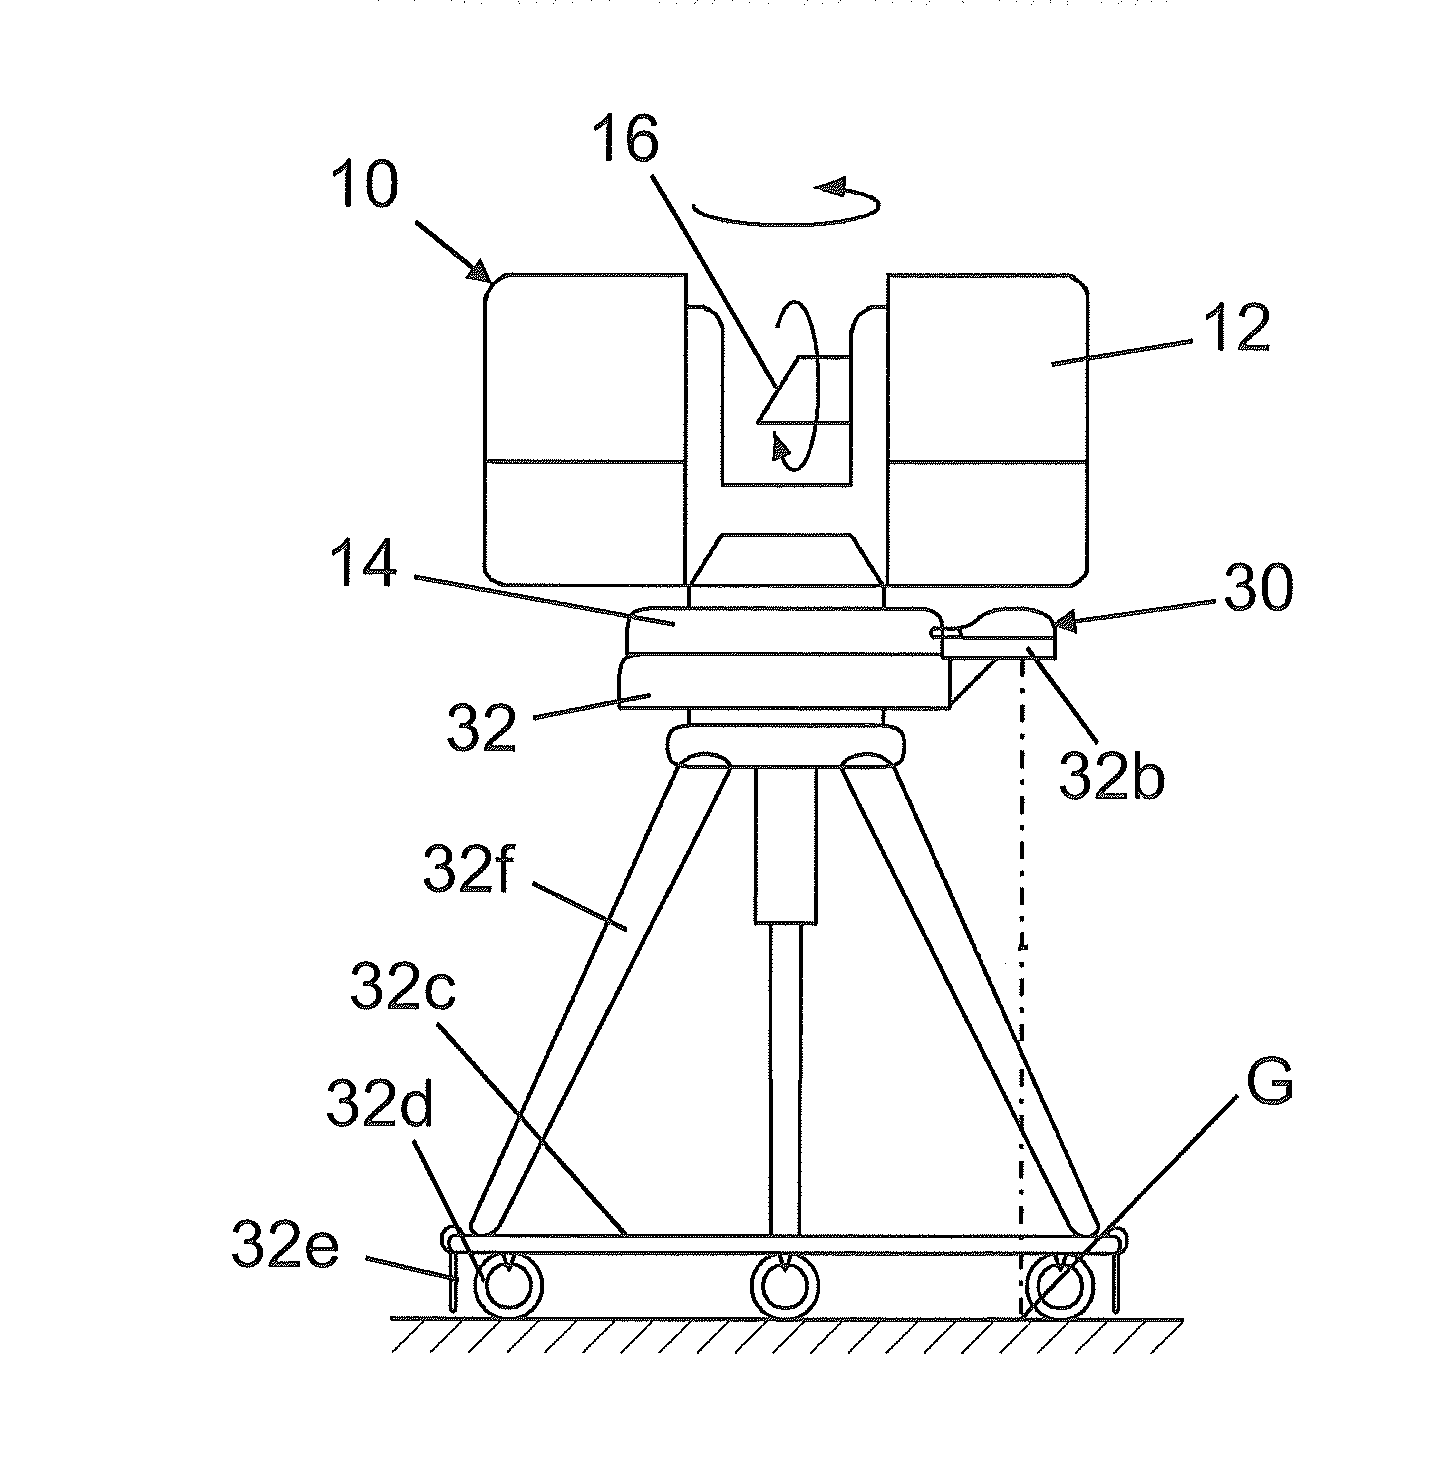 Device for optically scanning and measuring an environment